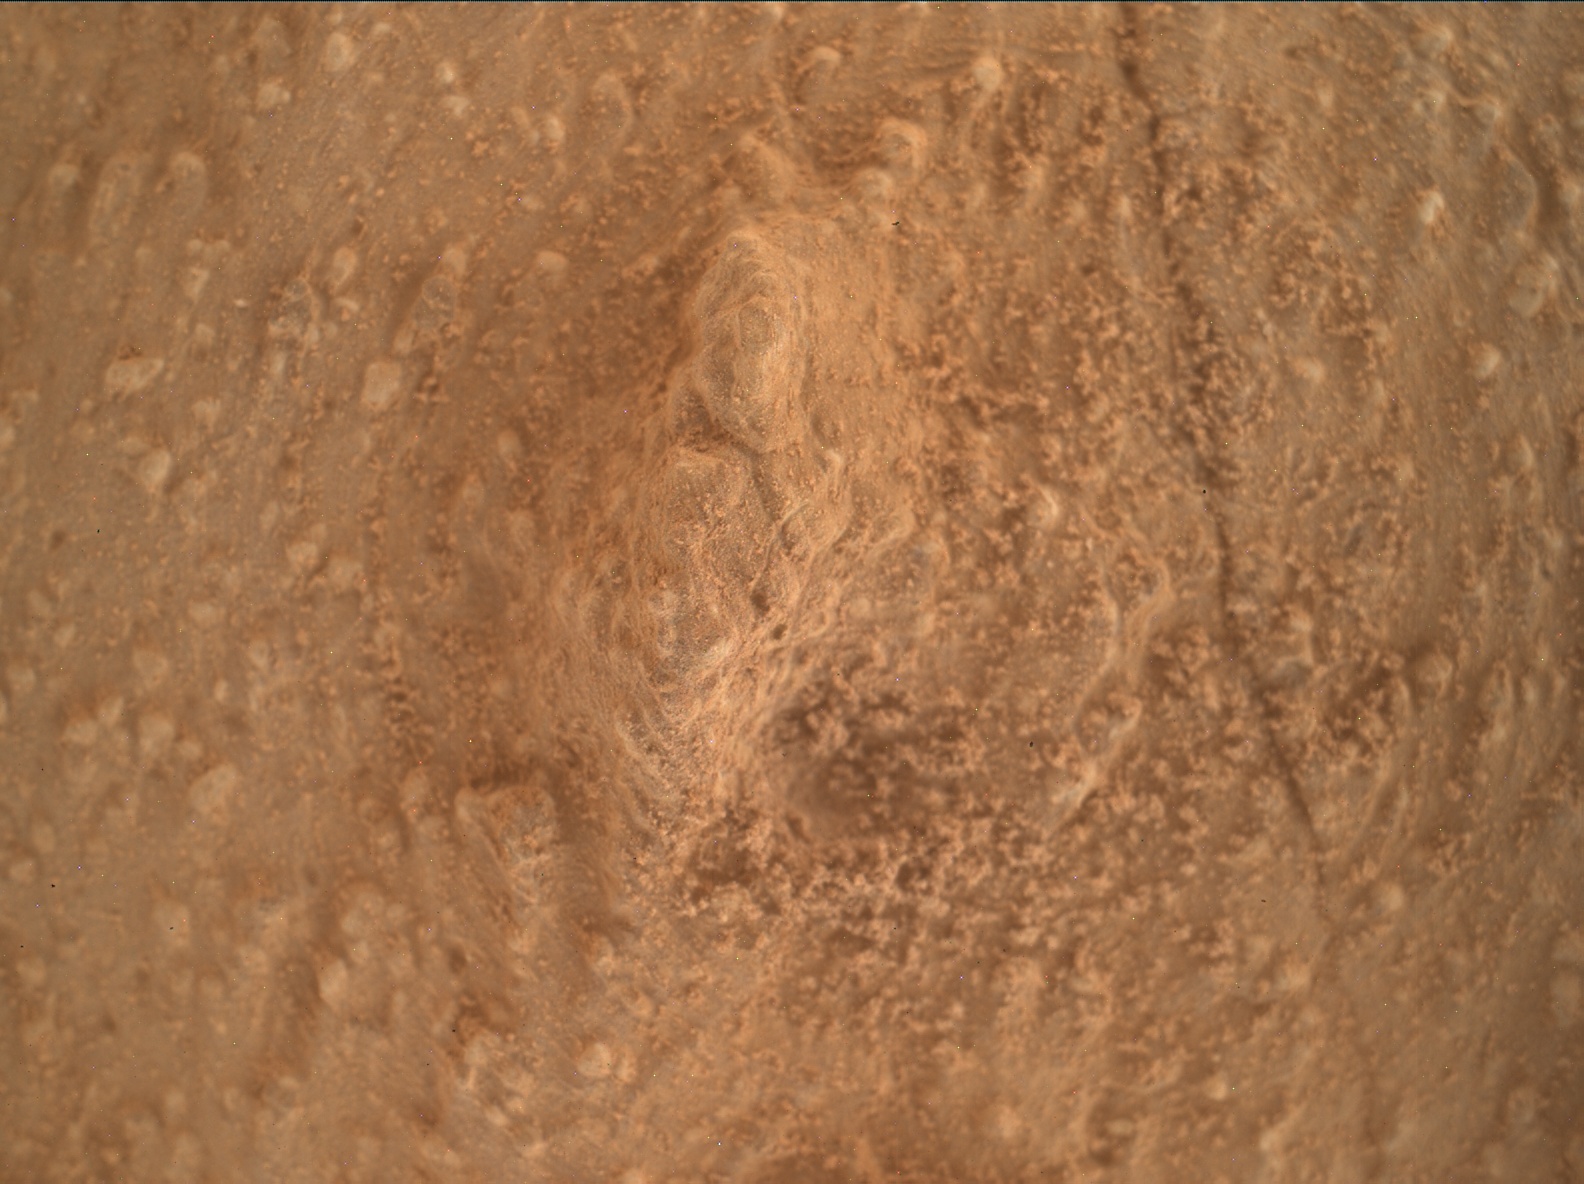 Nasa's Mars rover Curiosity acquired this image using its Mars Hand Lens Imager (MAHLI) on Sol 3858